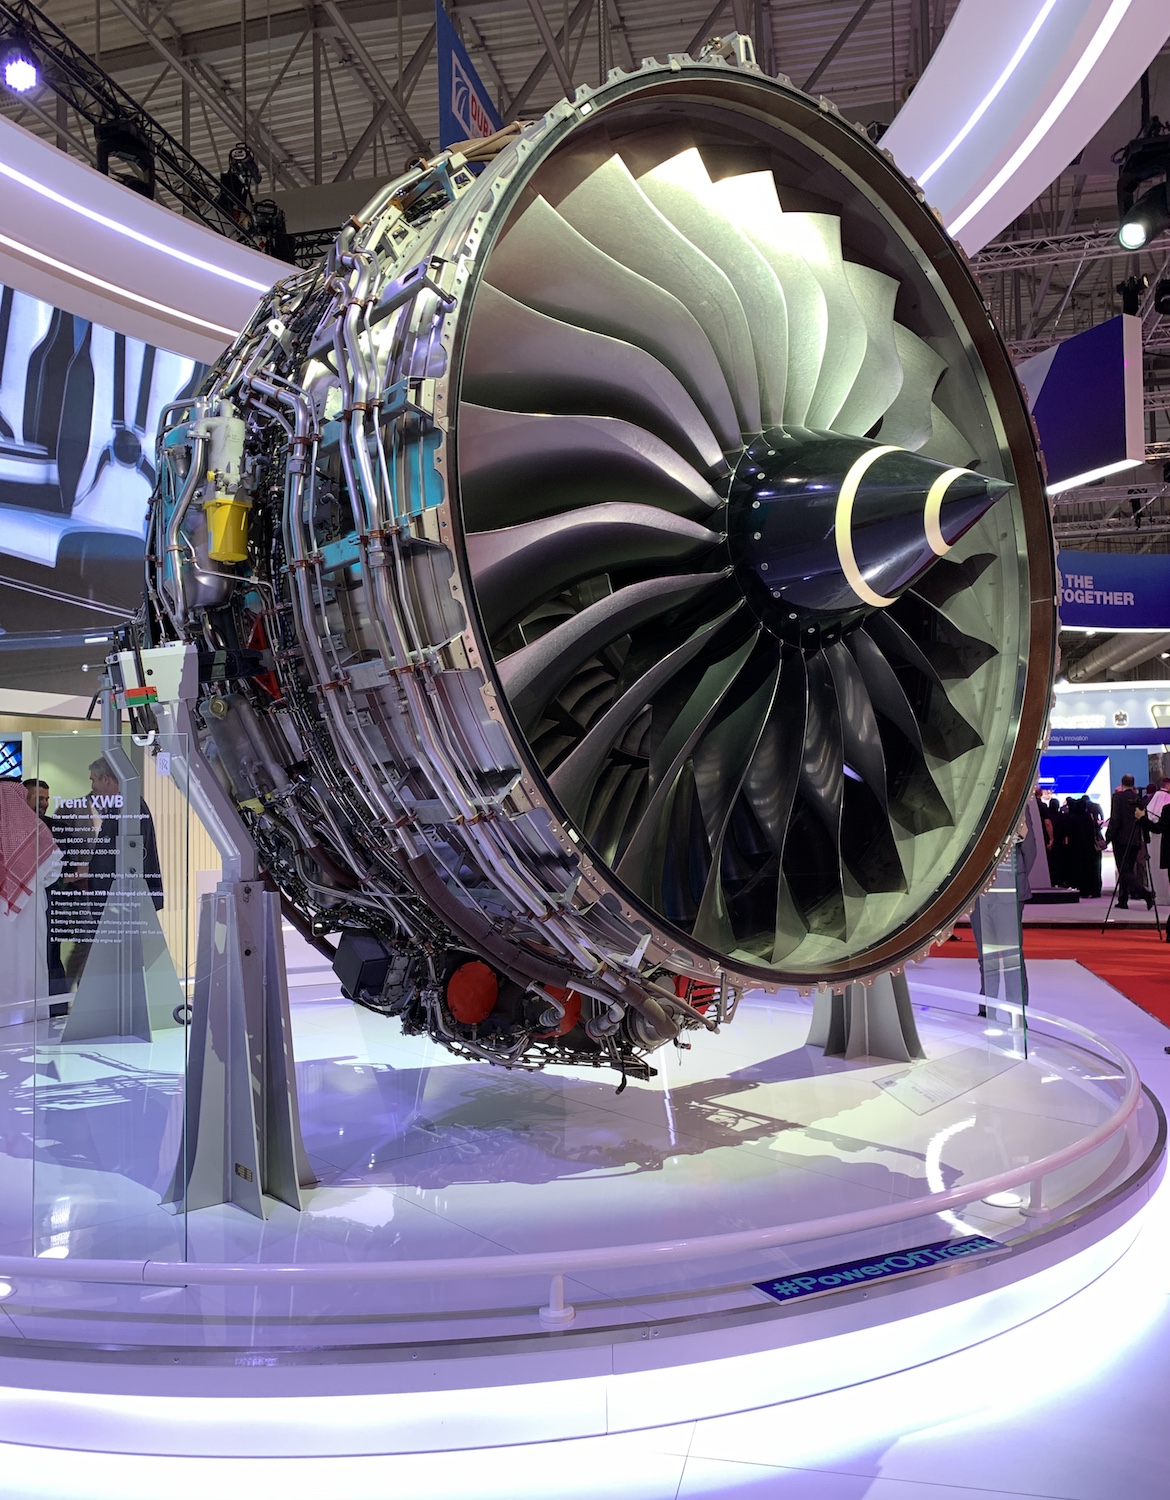 A Trent 1000 engine on display at the Rolls-Royce stand at the 2019 Dubai Airshow. (Denise McNabb)